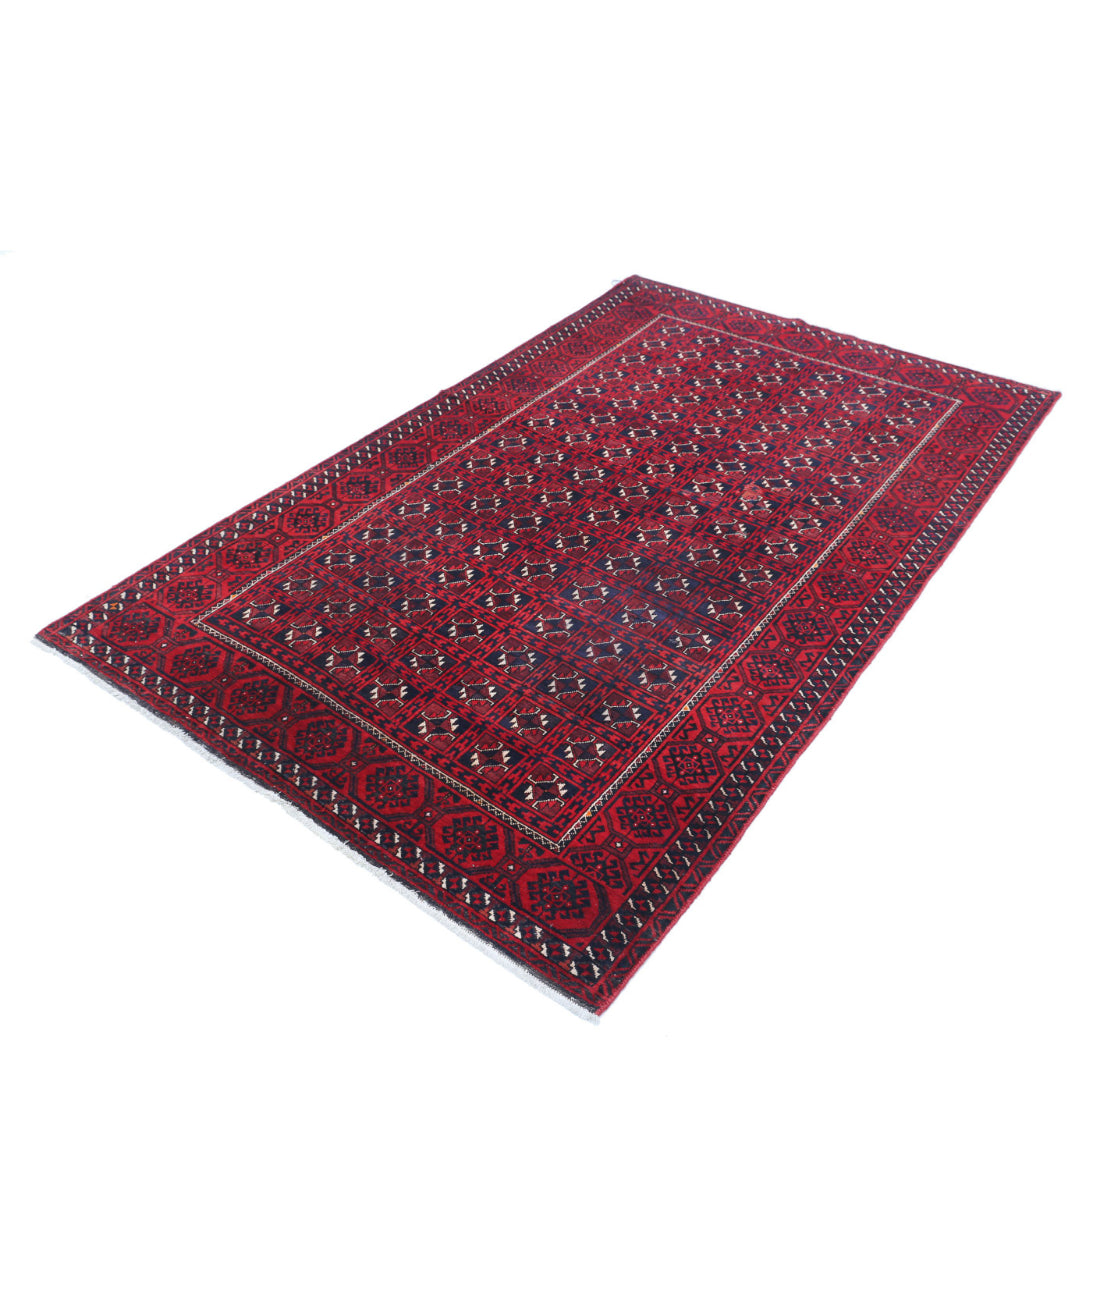 Hand Knotted Tribal Bokhara Wool Rug - 4'7'' x 7'7'' 4'7'' x 7'7'' (138 X 228) / Red / Blue